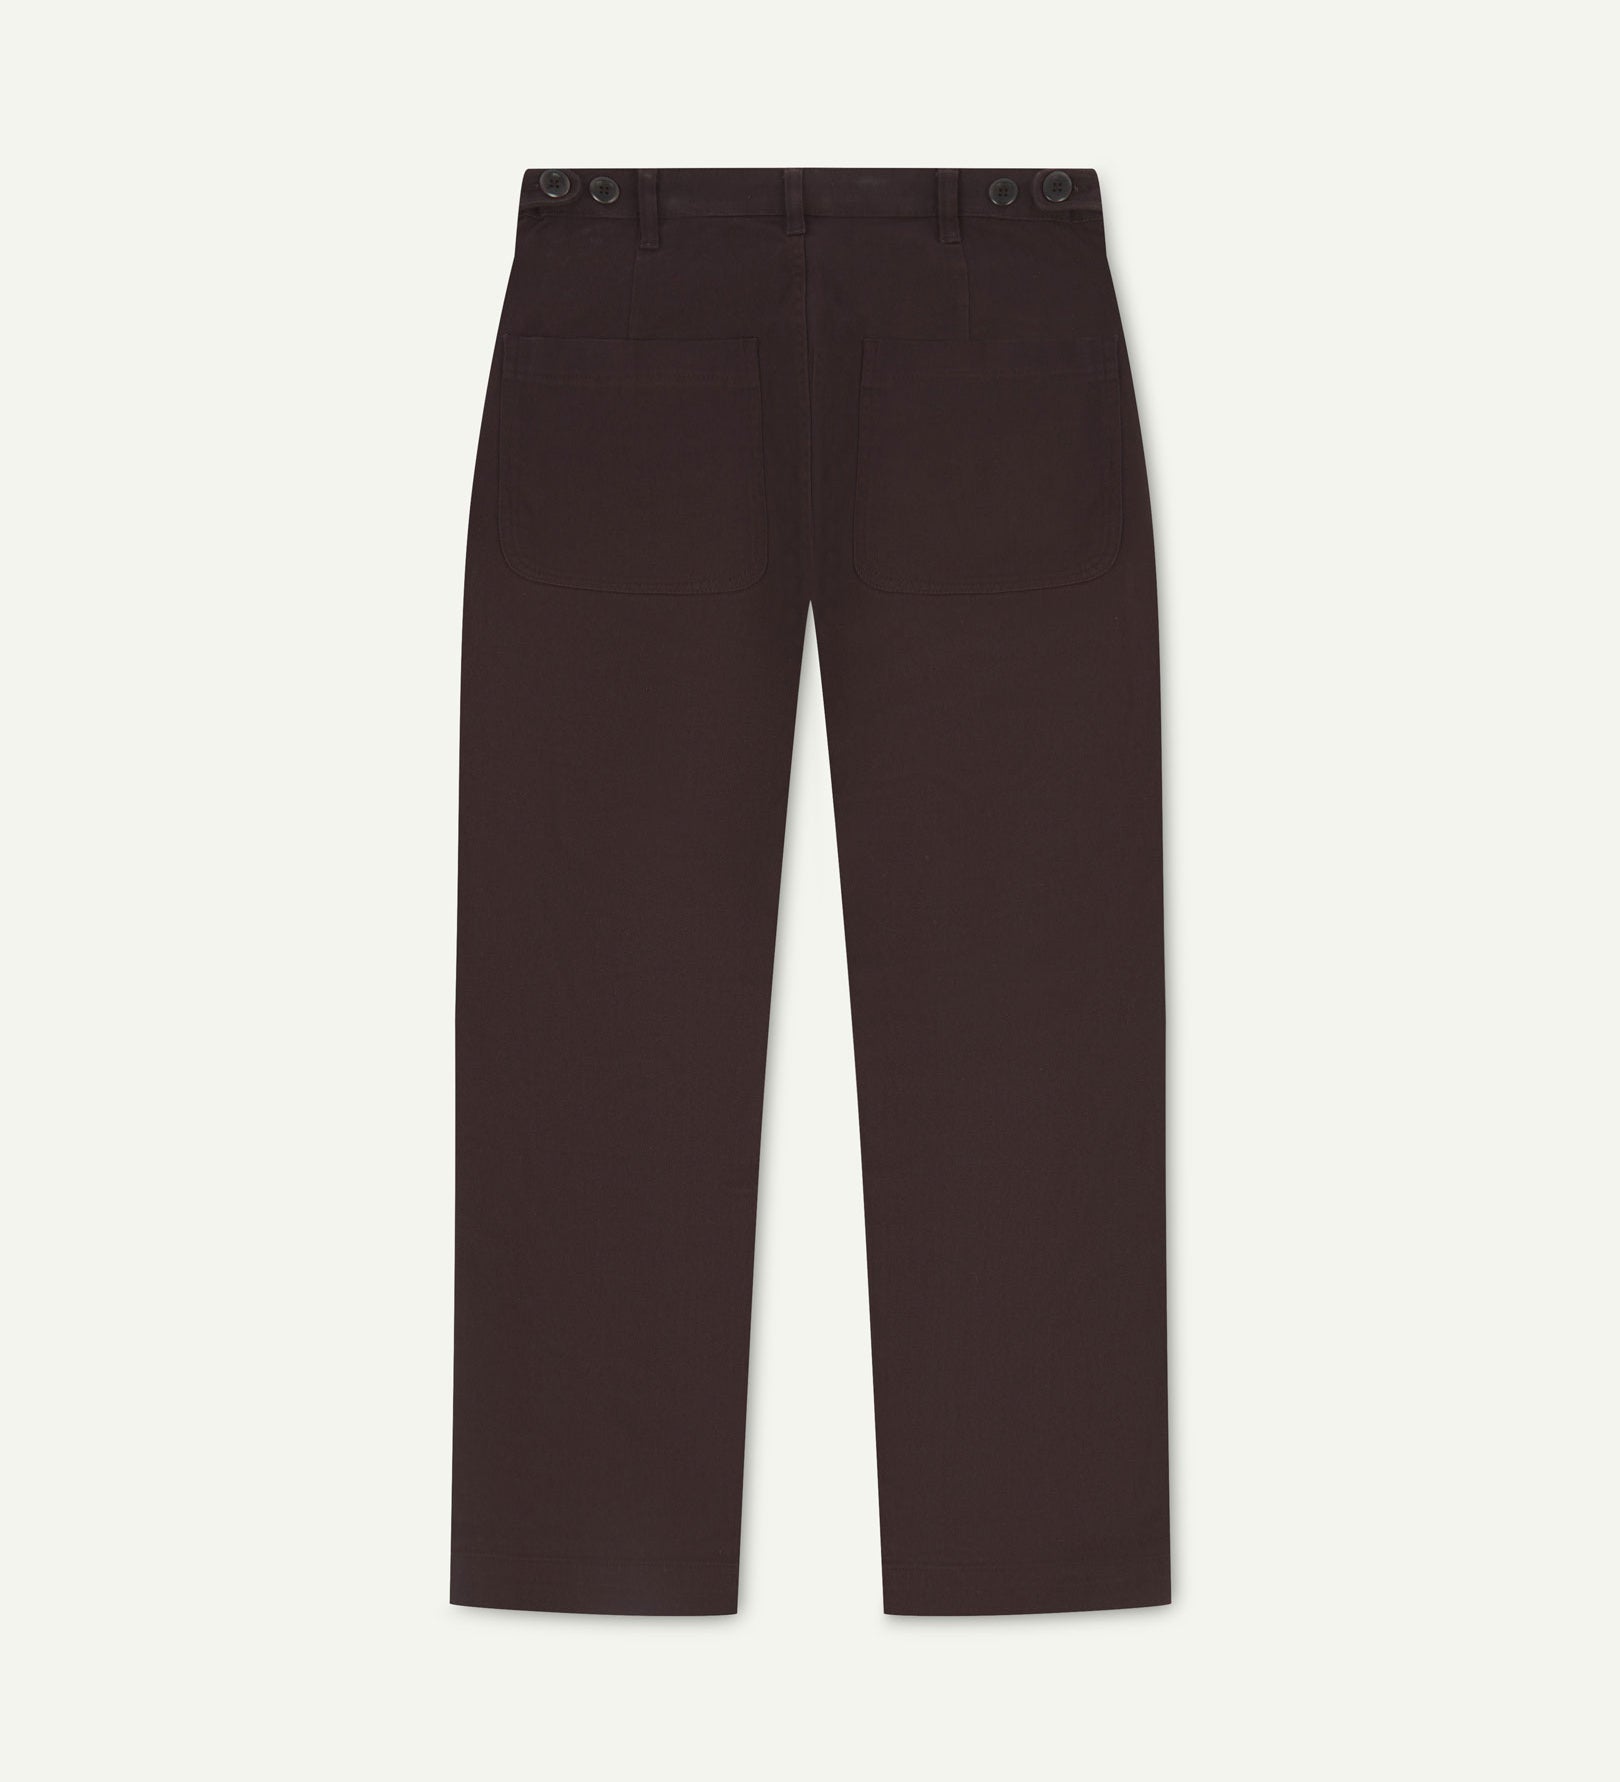 Back flat view of 5013 Uskees drill straight leg pants in brown-maroon, with focus on on rear pockets and adjustable waistband with corozo buttons.